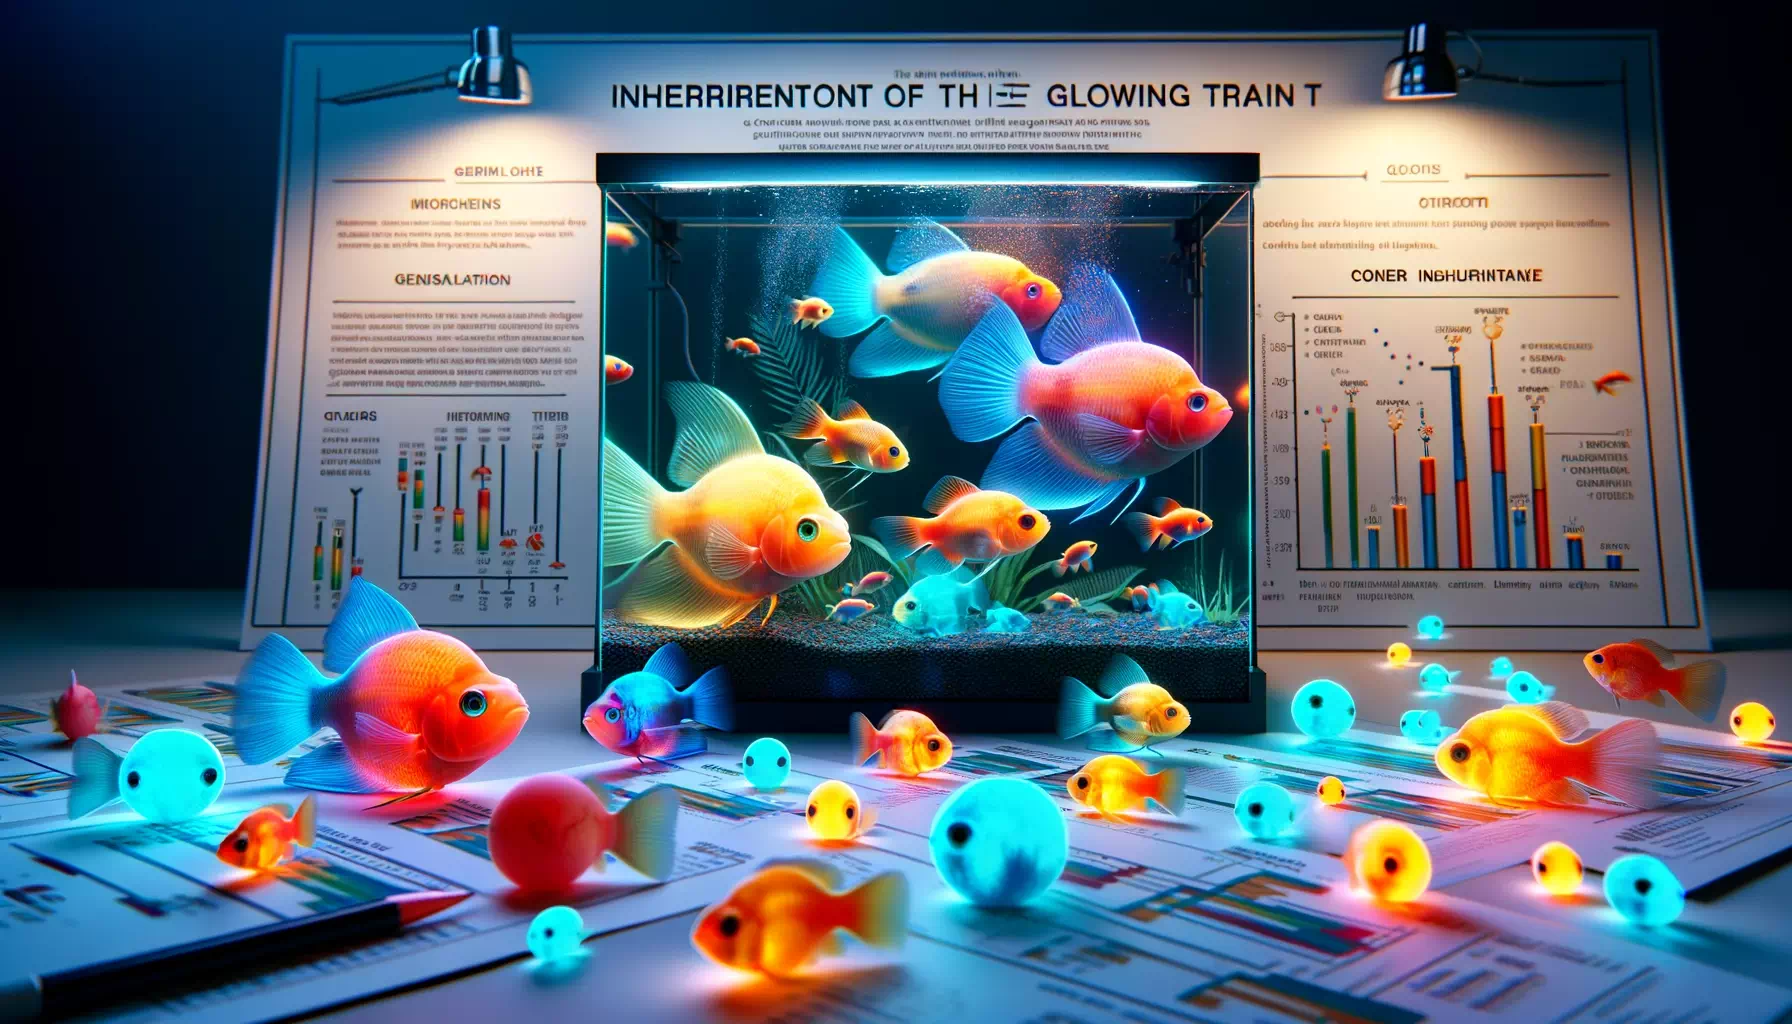 depicting the inheritance of the glowing trait in GloFish offspring. The scene includes GloFish parents and their offspring in a bre